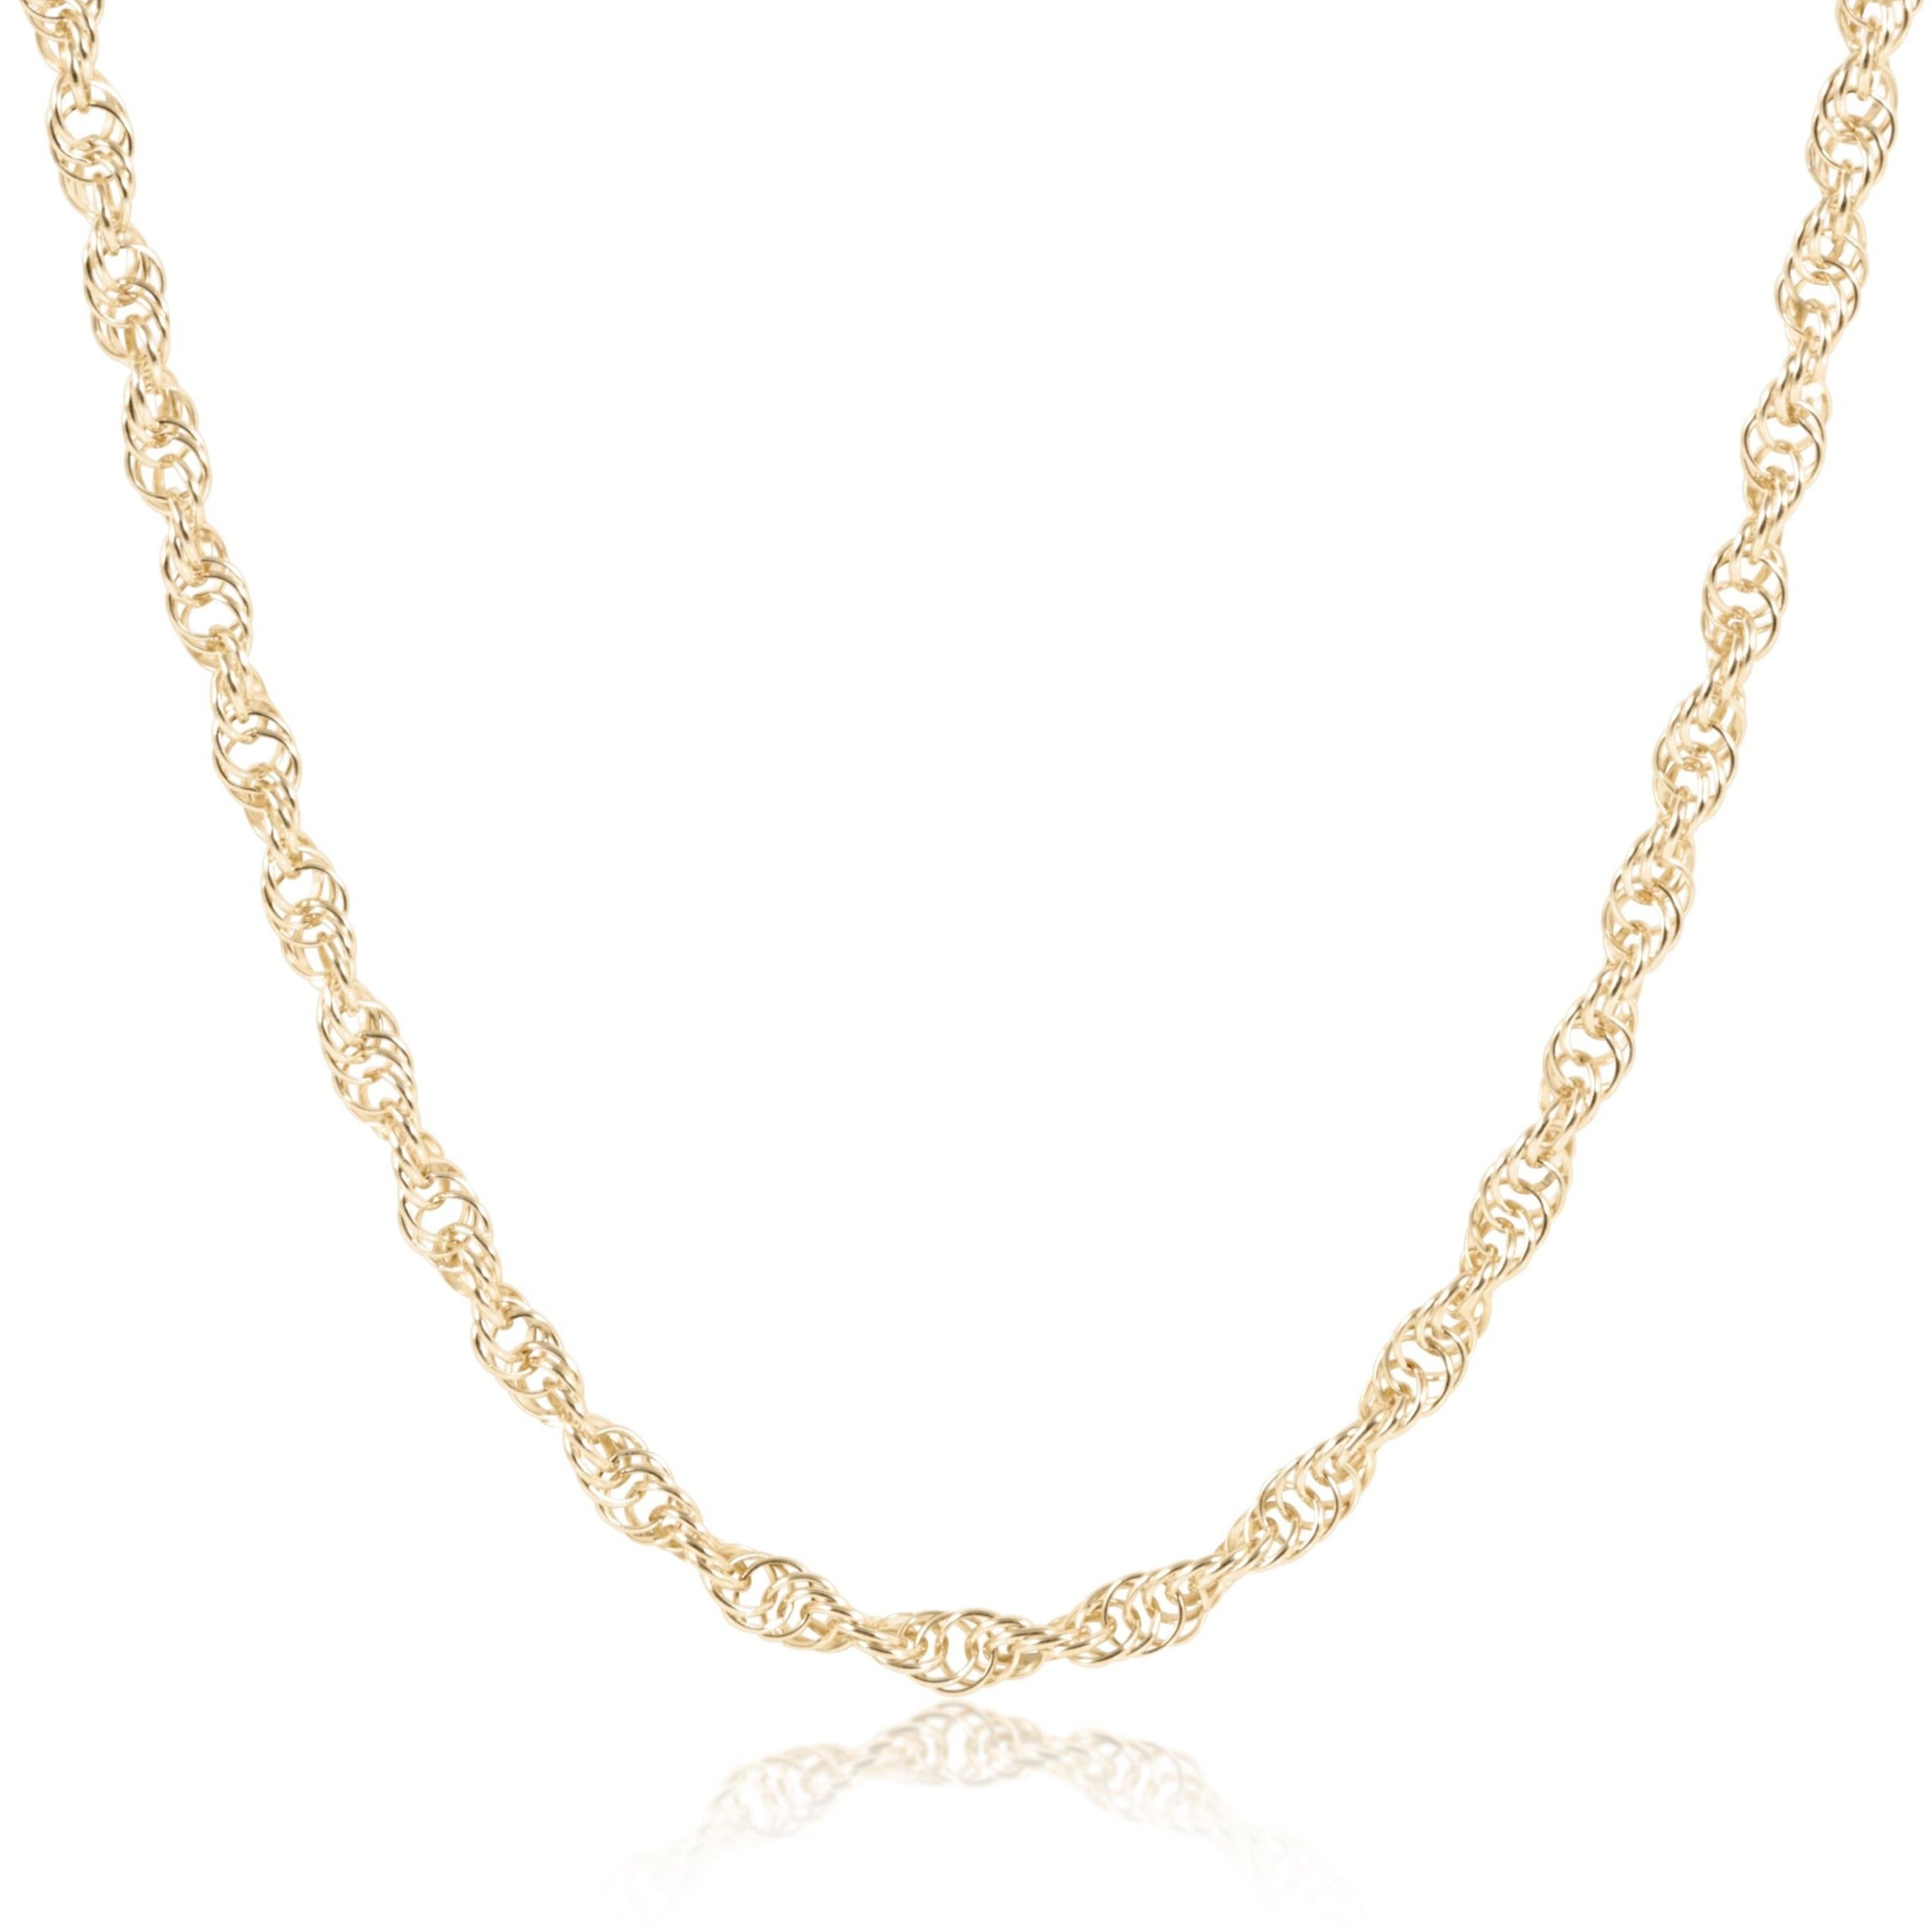 Rope Chain Choker Necklace, 15"